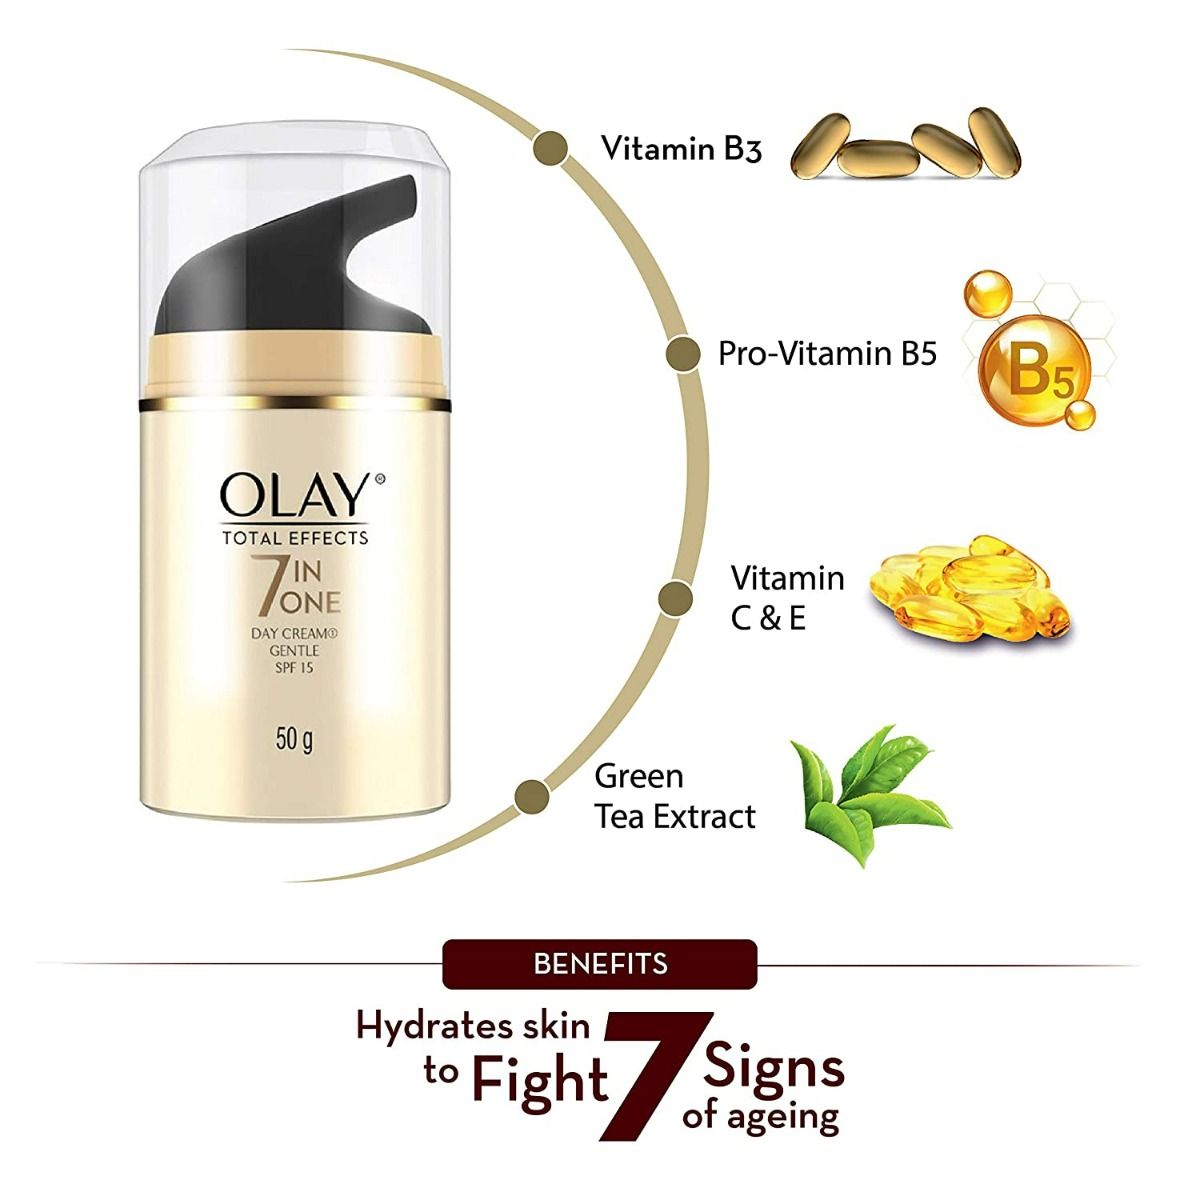 Olay Anti-Ageing Cream SPF 15, 50 gm, Pack of 1 